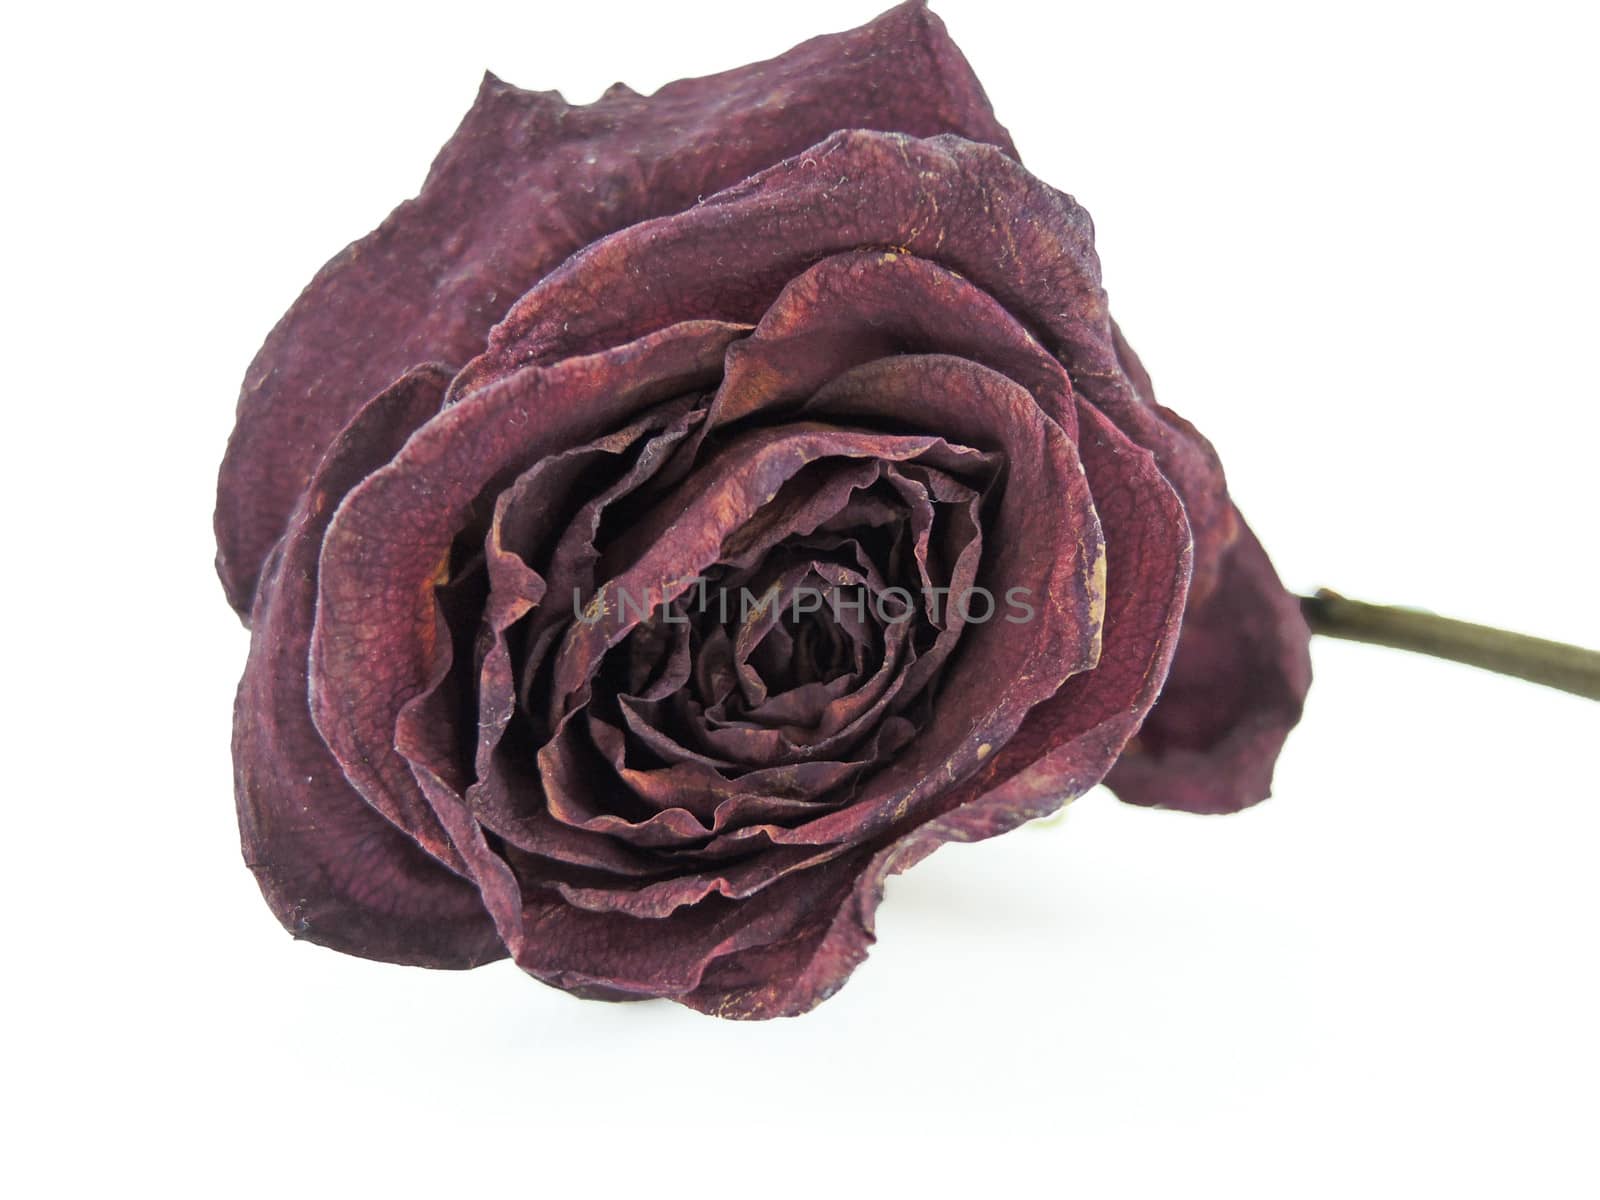 Dry rose on white background isolated by MalyDesigner